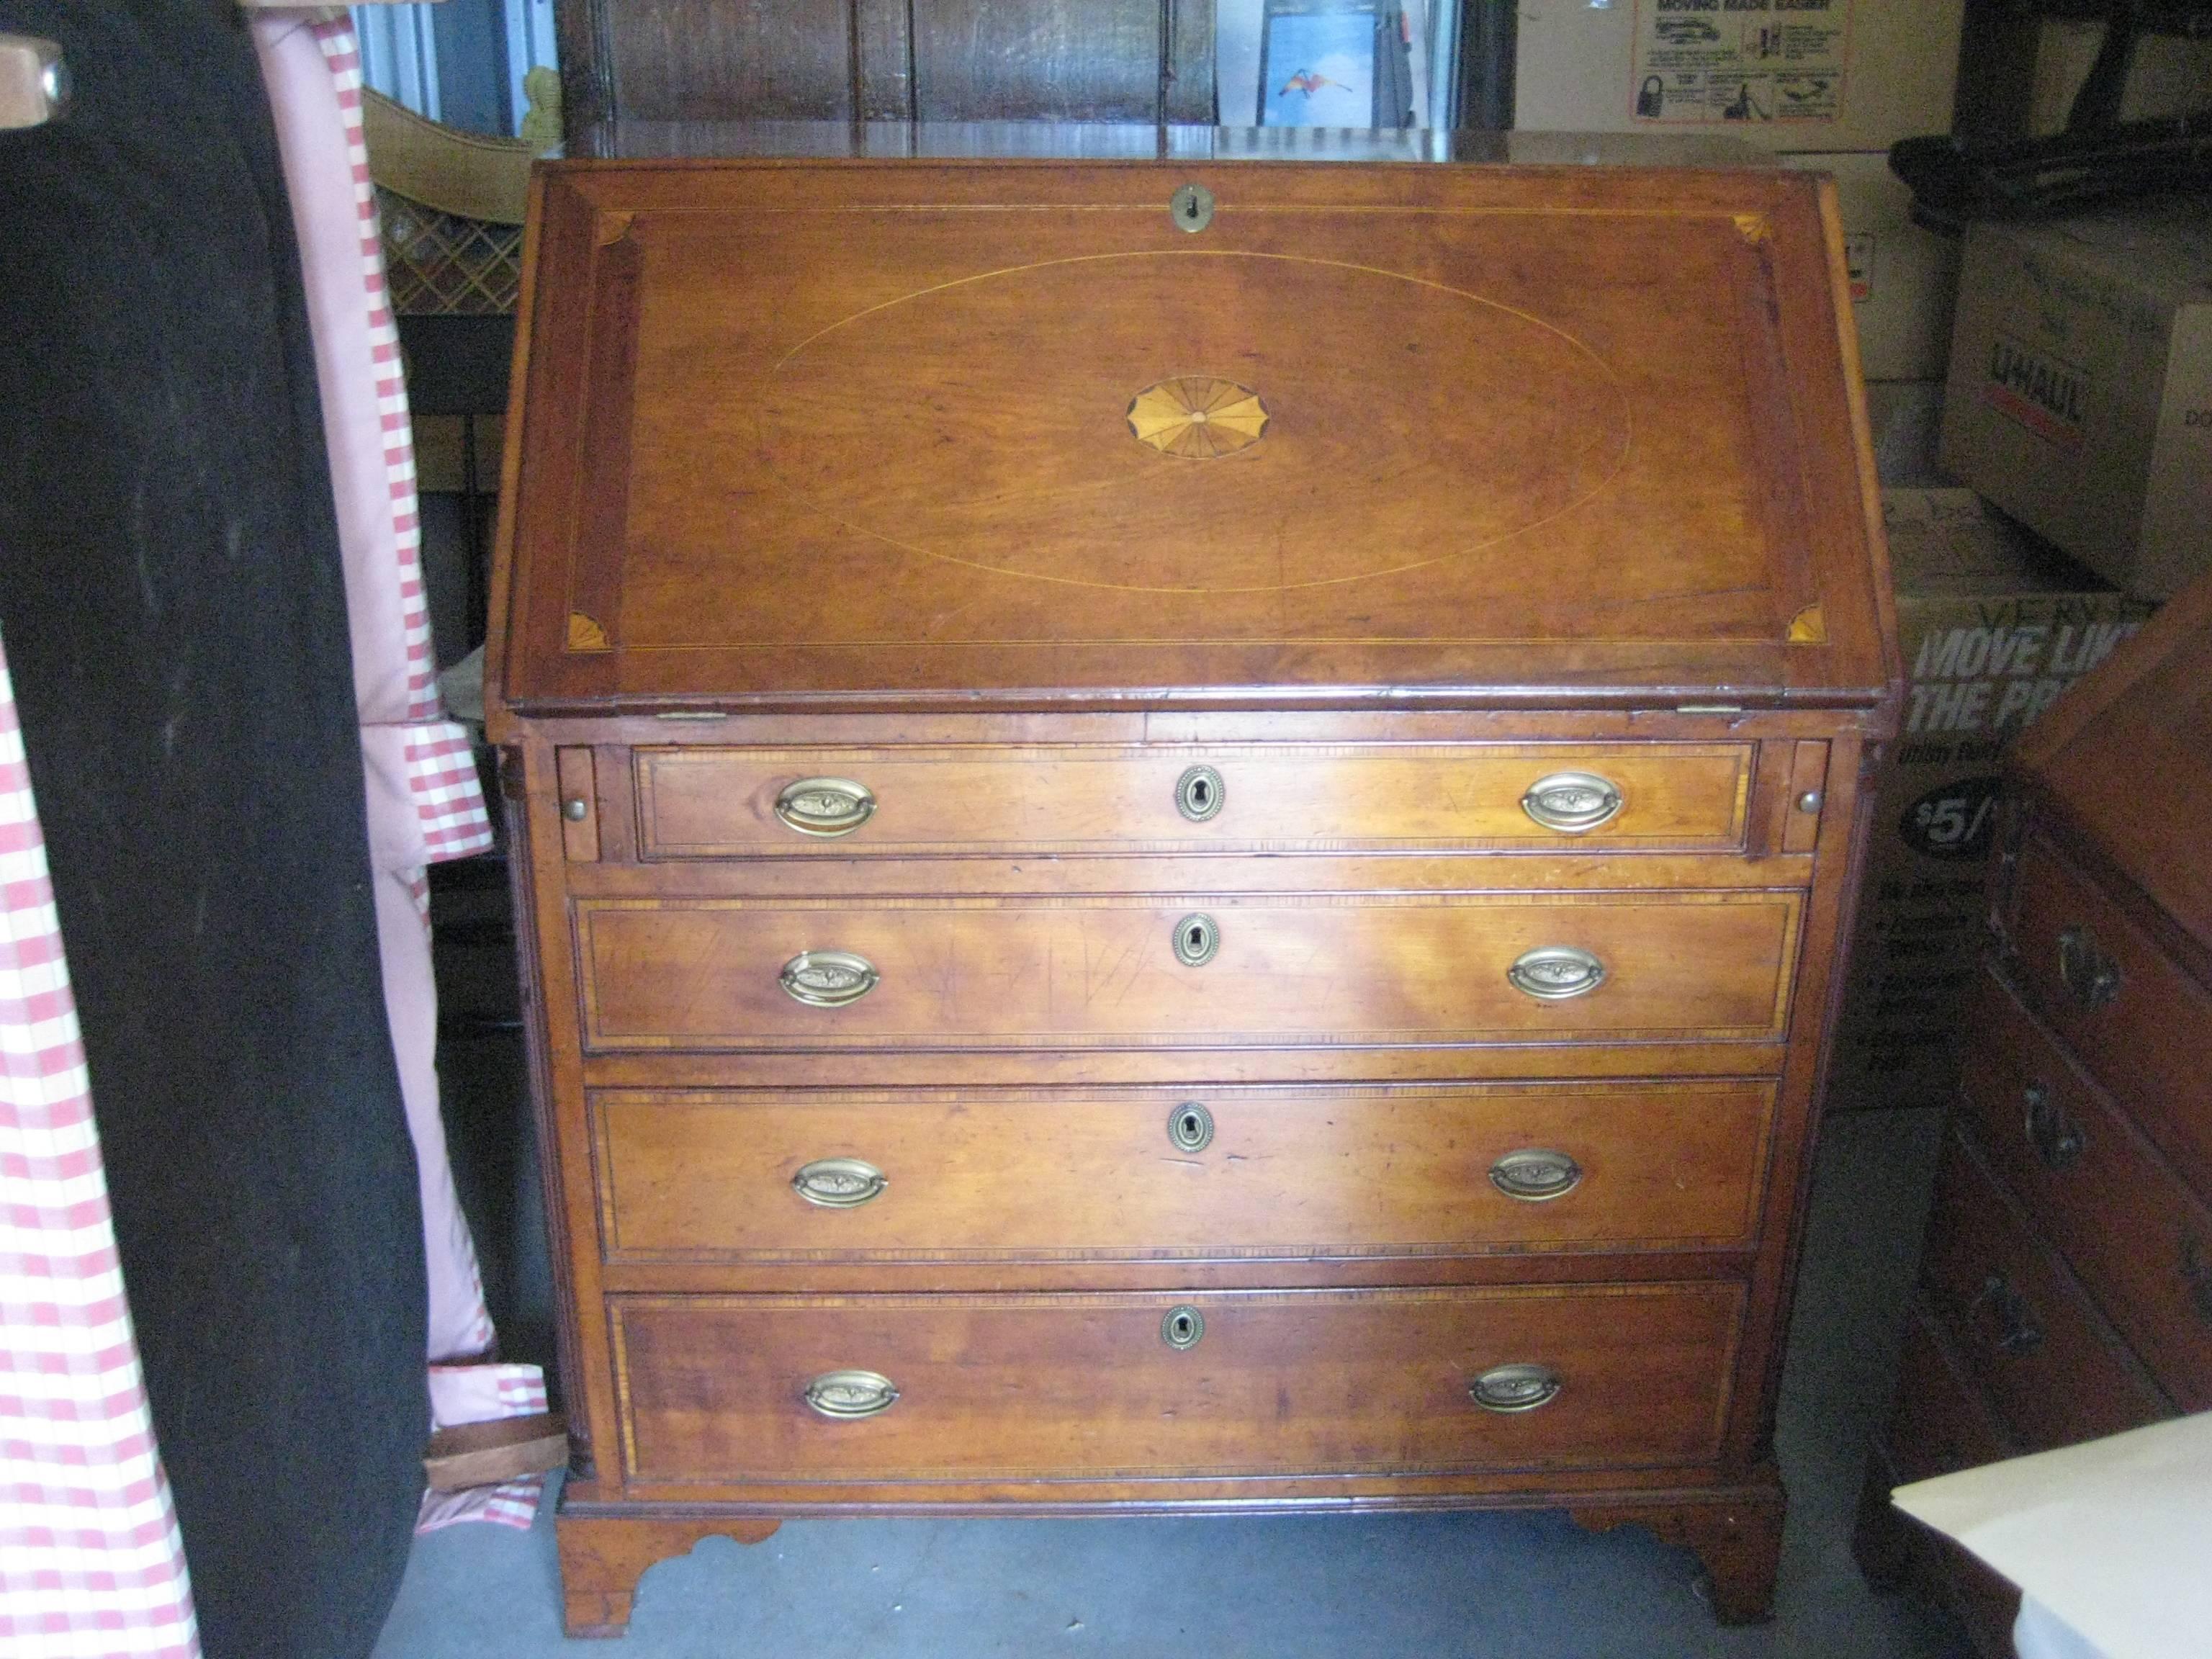 English fruitwood slant-top desk with inlaid design and details on the drawers.